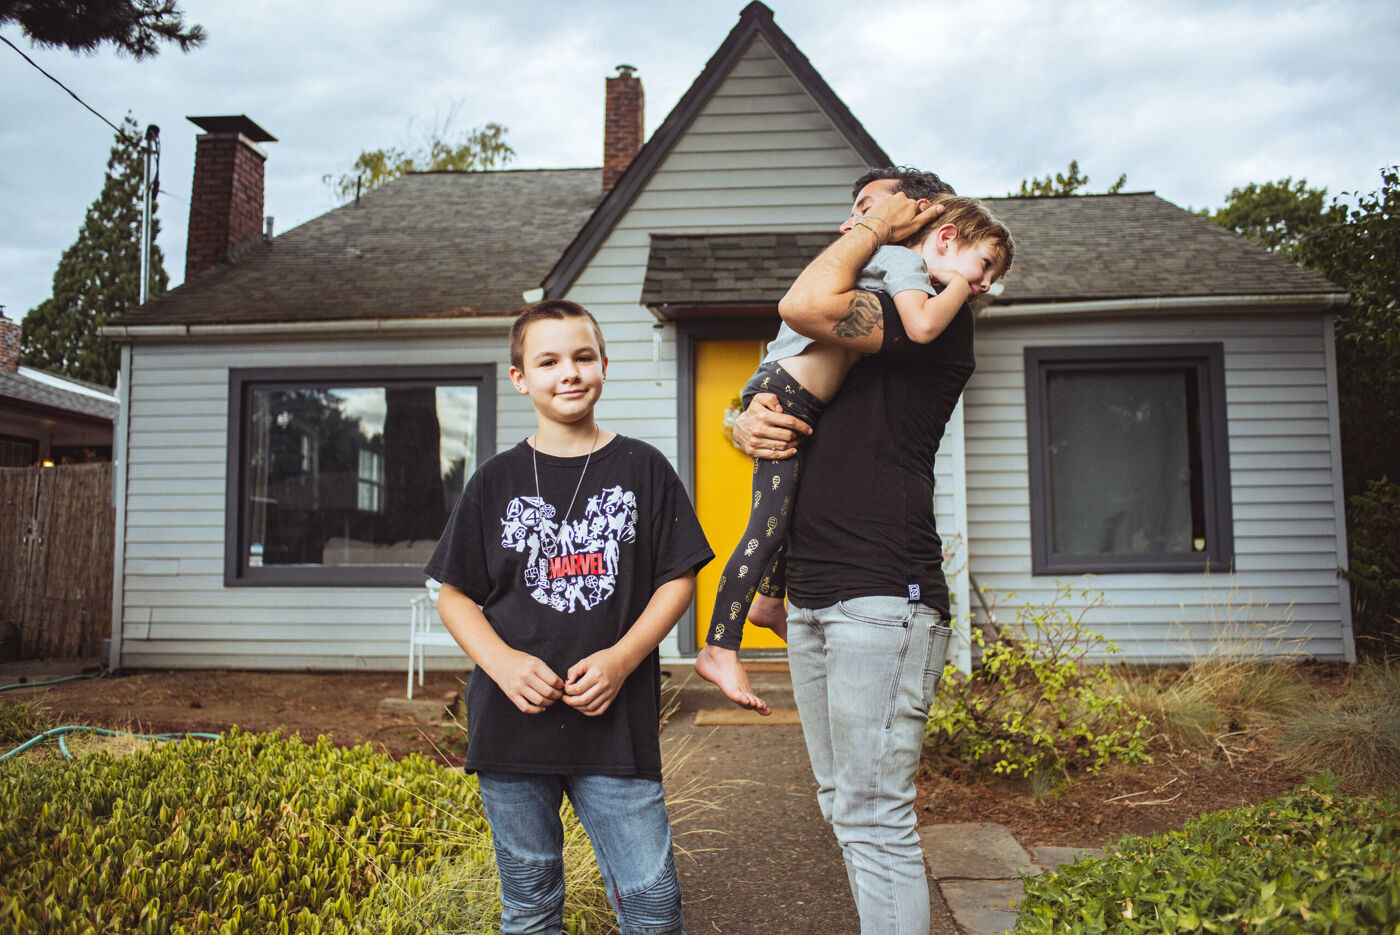 Trystan and Biff let their kids explore personal expression “as much as they want — within reason,” including letting Hailey shave her head for the summer. Photo: Mark Pratt-Russum